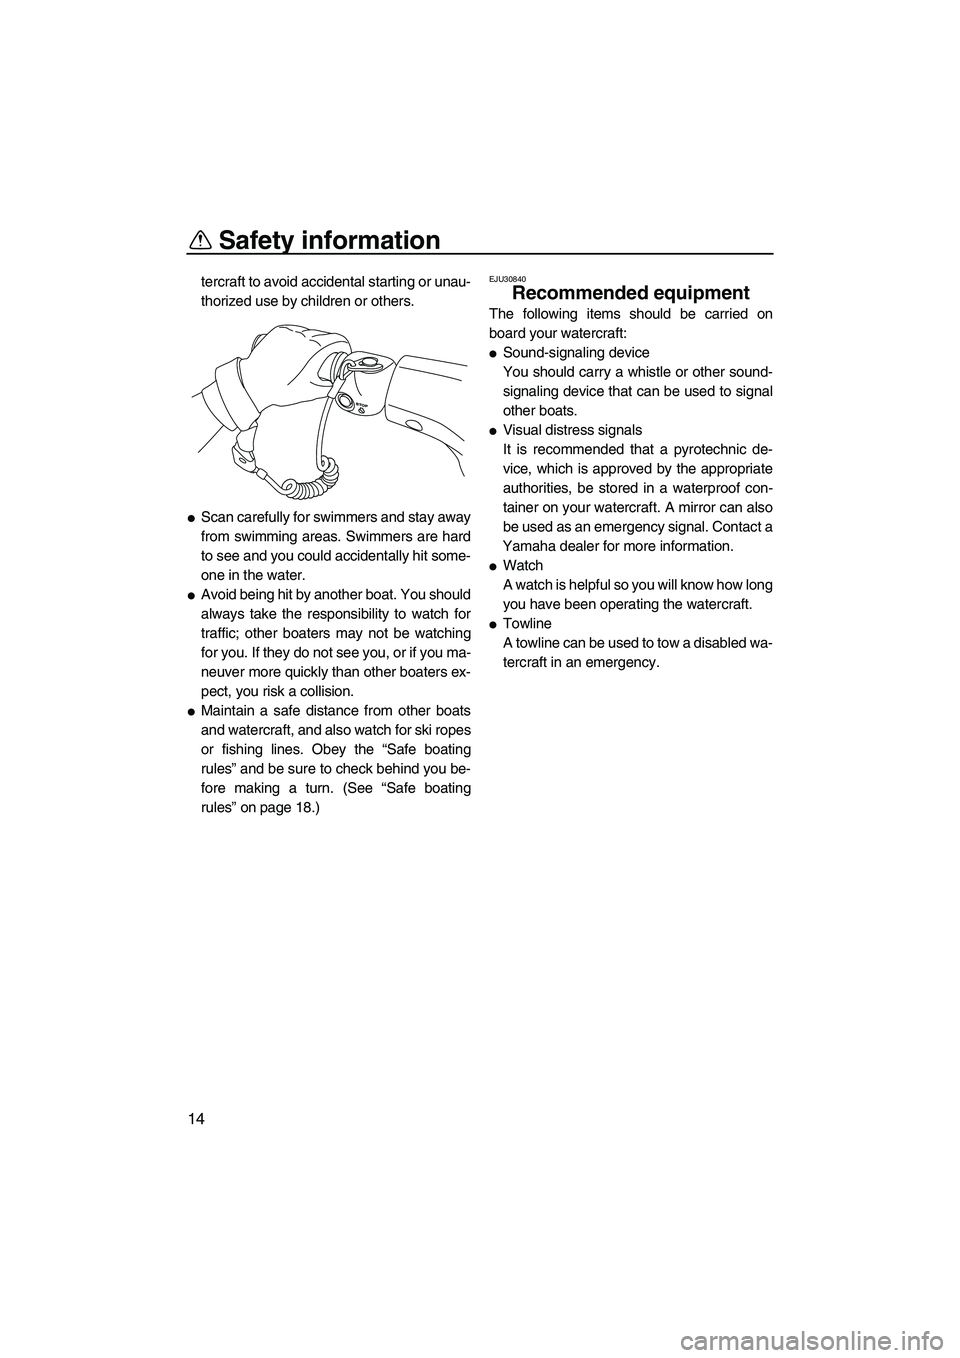 YAMAHA VXS 2012 User Guide Safety information
14
tercraft to avoid accidental starting or unau-
thorized use by children or others.
Scan carefully for swimmers and stay away
from swimming areas. Swimmers are hard
to see and yo